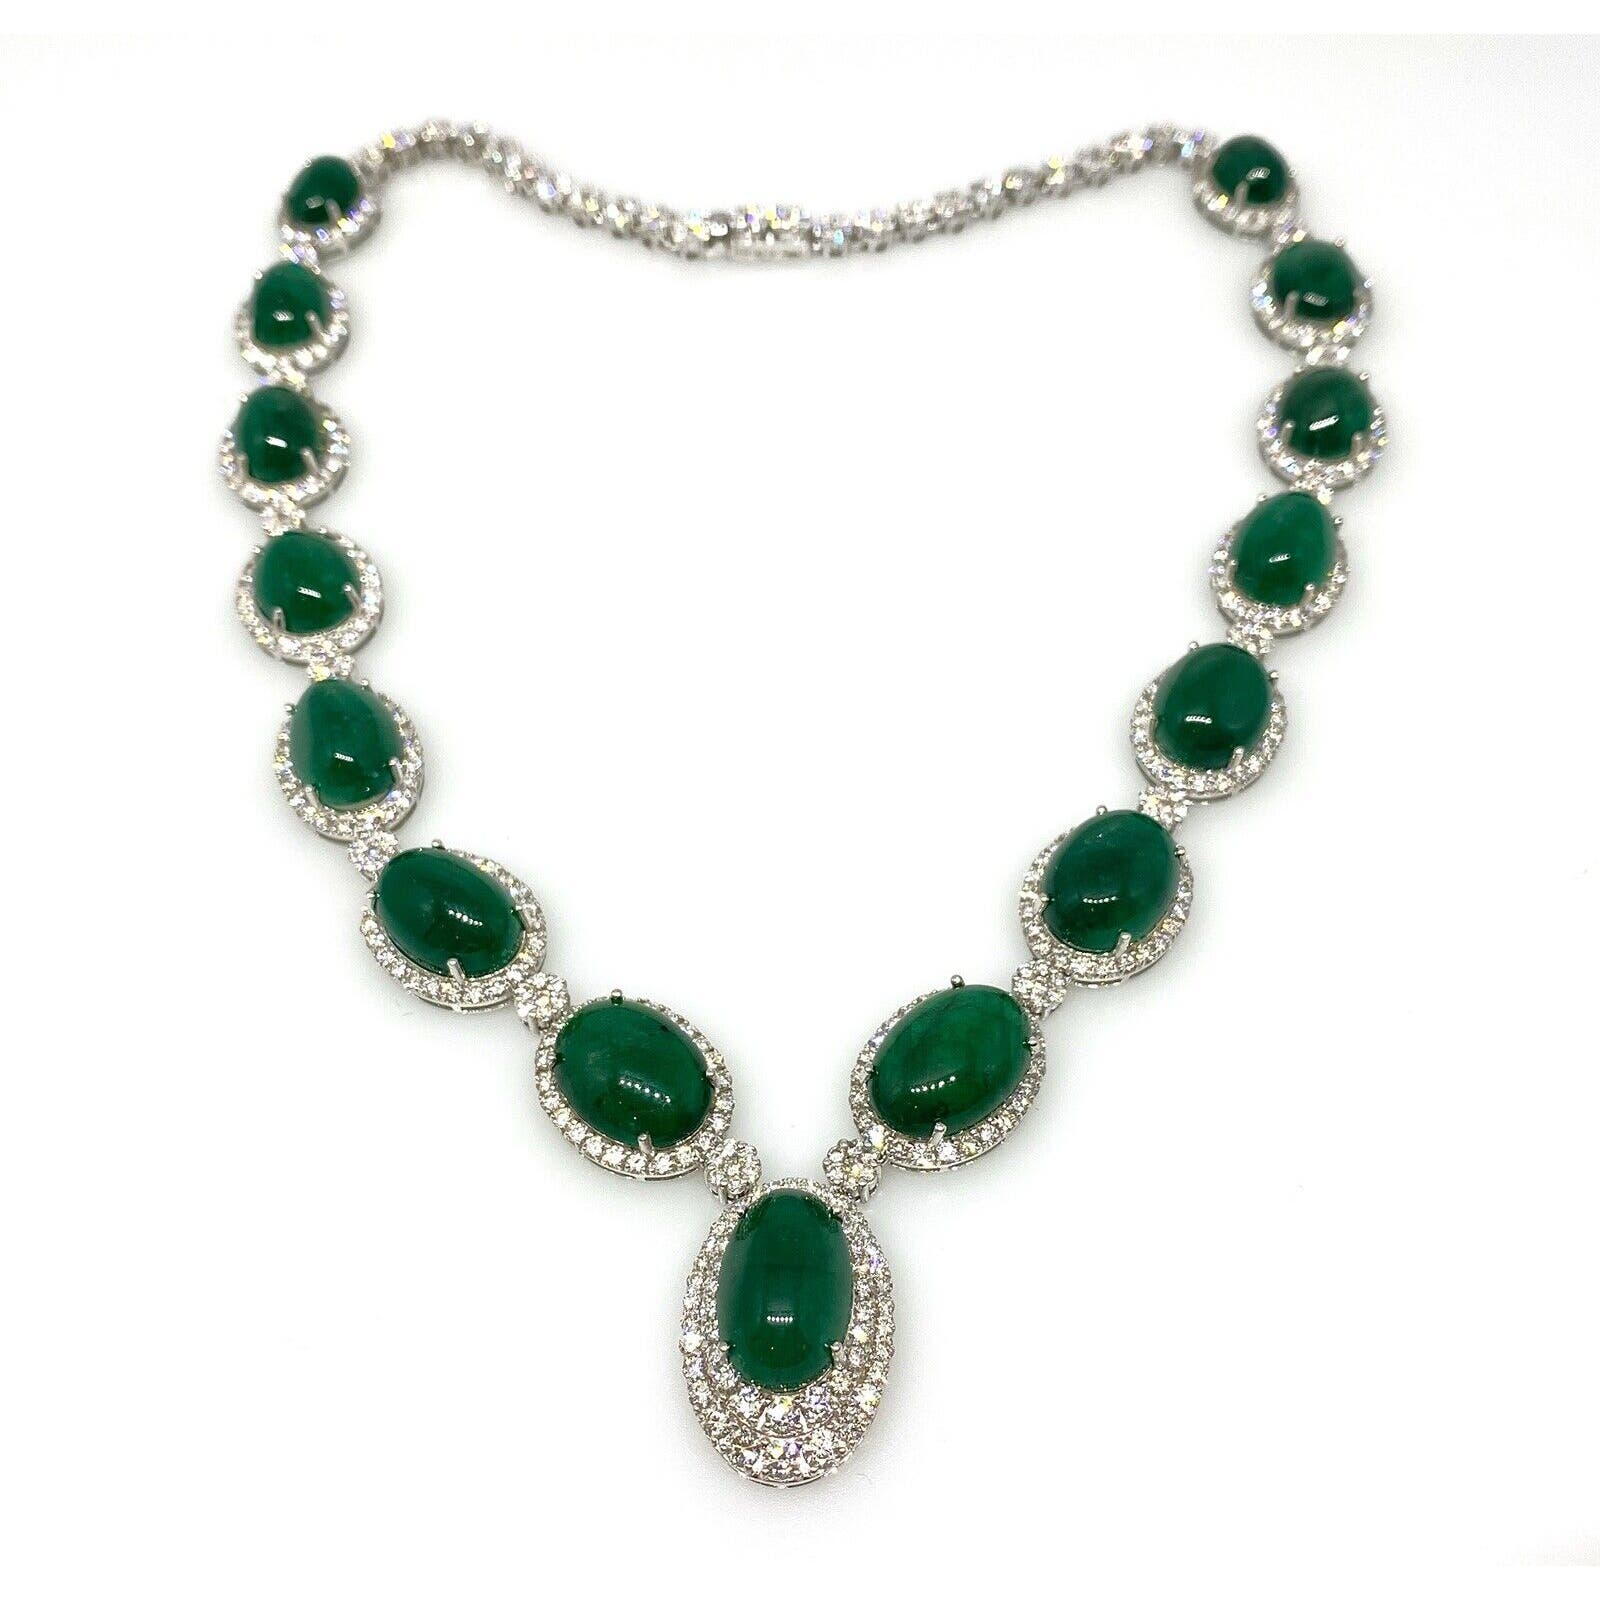 Cabochon Emerald and Diamond Necklace 100.00 cttw in 18k White Gold - HM2304AB